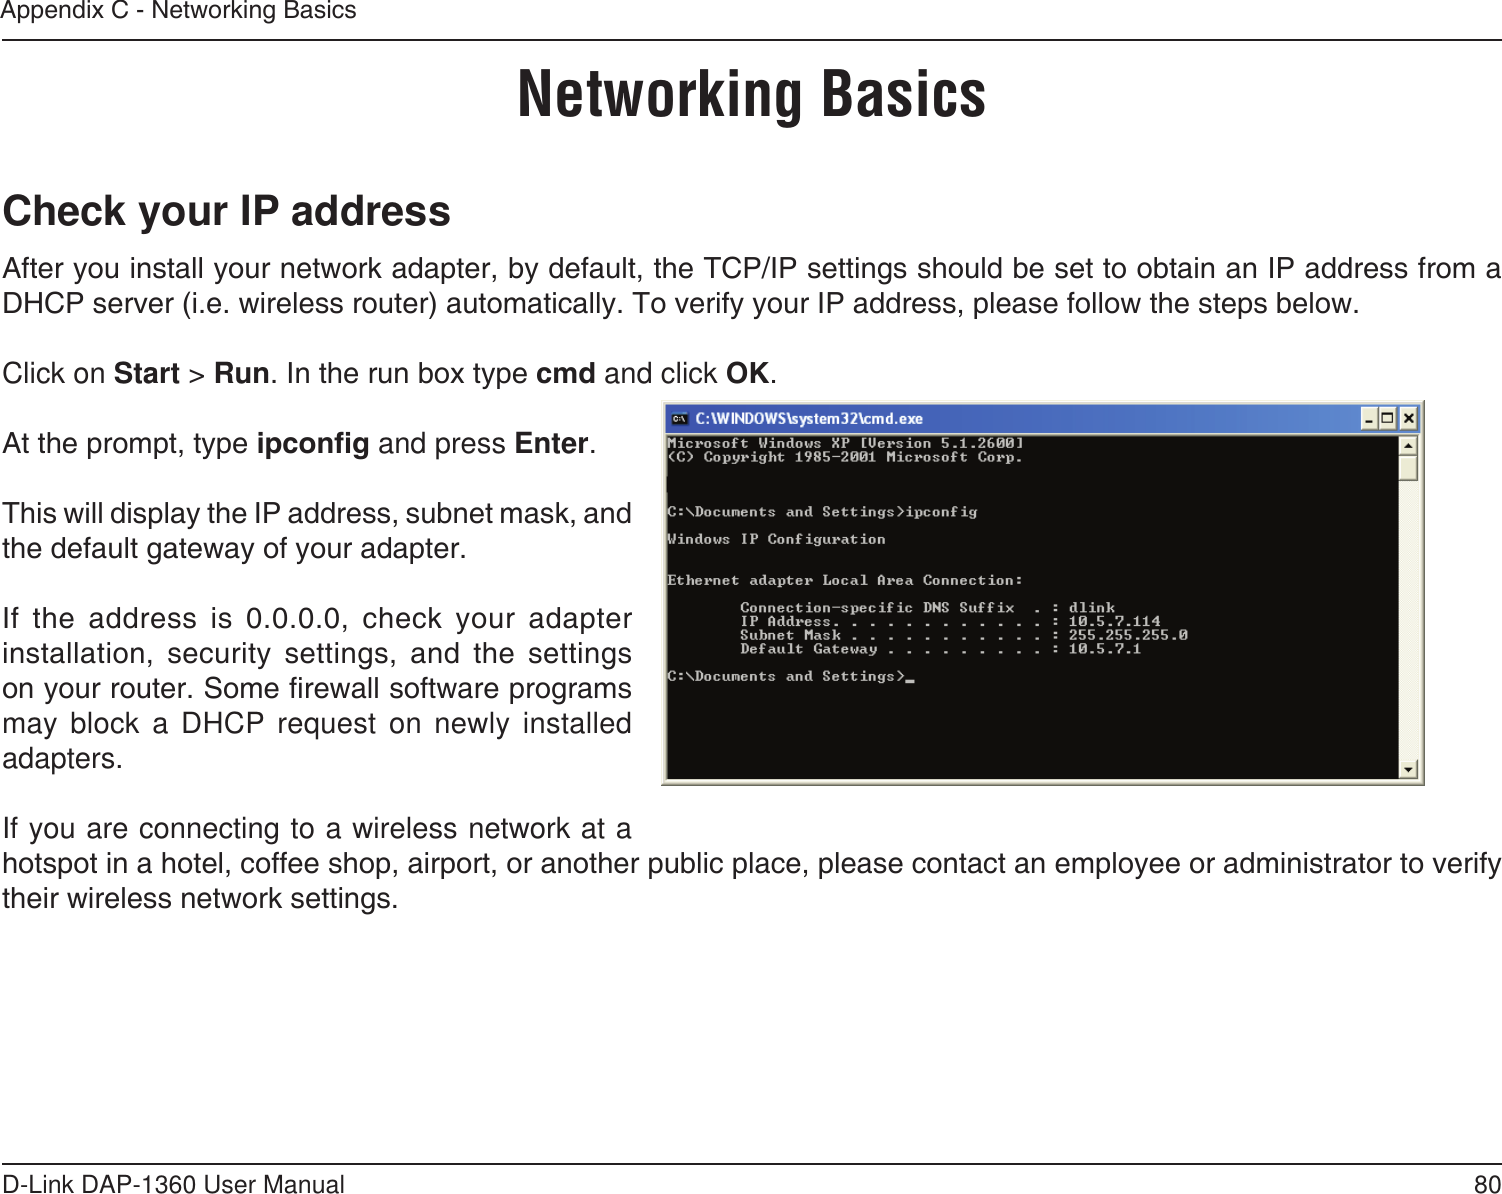 80D-Link DAP-1360 User ManualAppendix C - Networking BasicsNetworking BasicsCheck your IP addressAfter you install your network adapter, by default, the TCP/IP settings should be set to obtain an IP address from a DHCP server (i.e. wireless router) automatically. To verify your IP address, please follow the steps below.Click on Start &gt; Run. In the run box type cmd and click OK.At the prompt, type ipcong and press Enter.This will display the IP address, subnet mask, and the default gateway of your adapter.If  the  address  is  0.0.0.0,  check  your  adapter installation,  security  settings,  and  the  settings on your router. Some rewall software programs may block a DHCP request on newly installed adapters. If you are connecting to a wireless network at a hotspot in a hotel, coffee shop, airport, or another public place, please contact an employee or administrator to verify their wireless network settings.